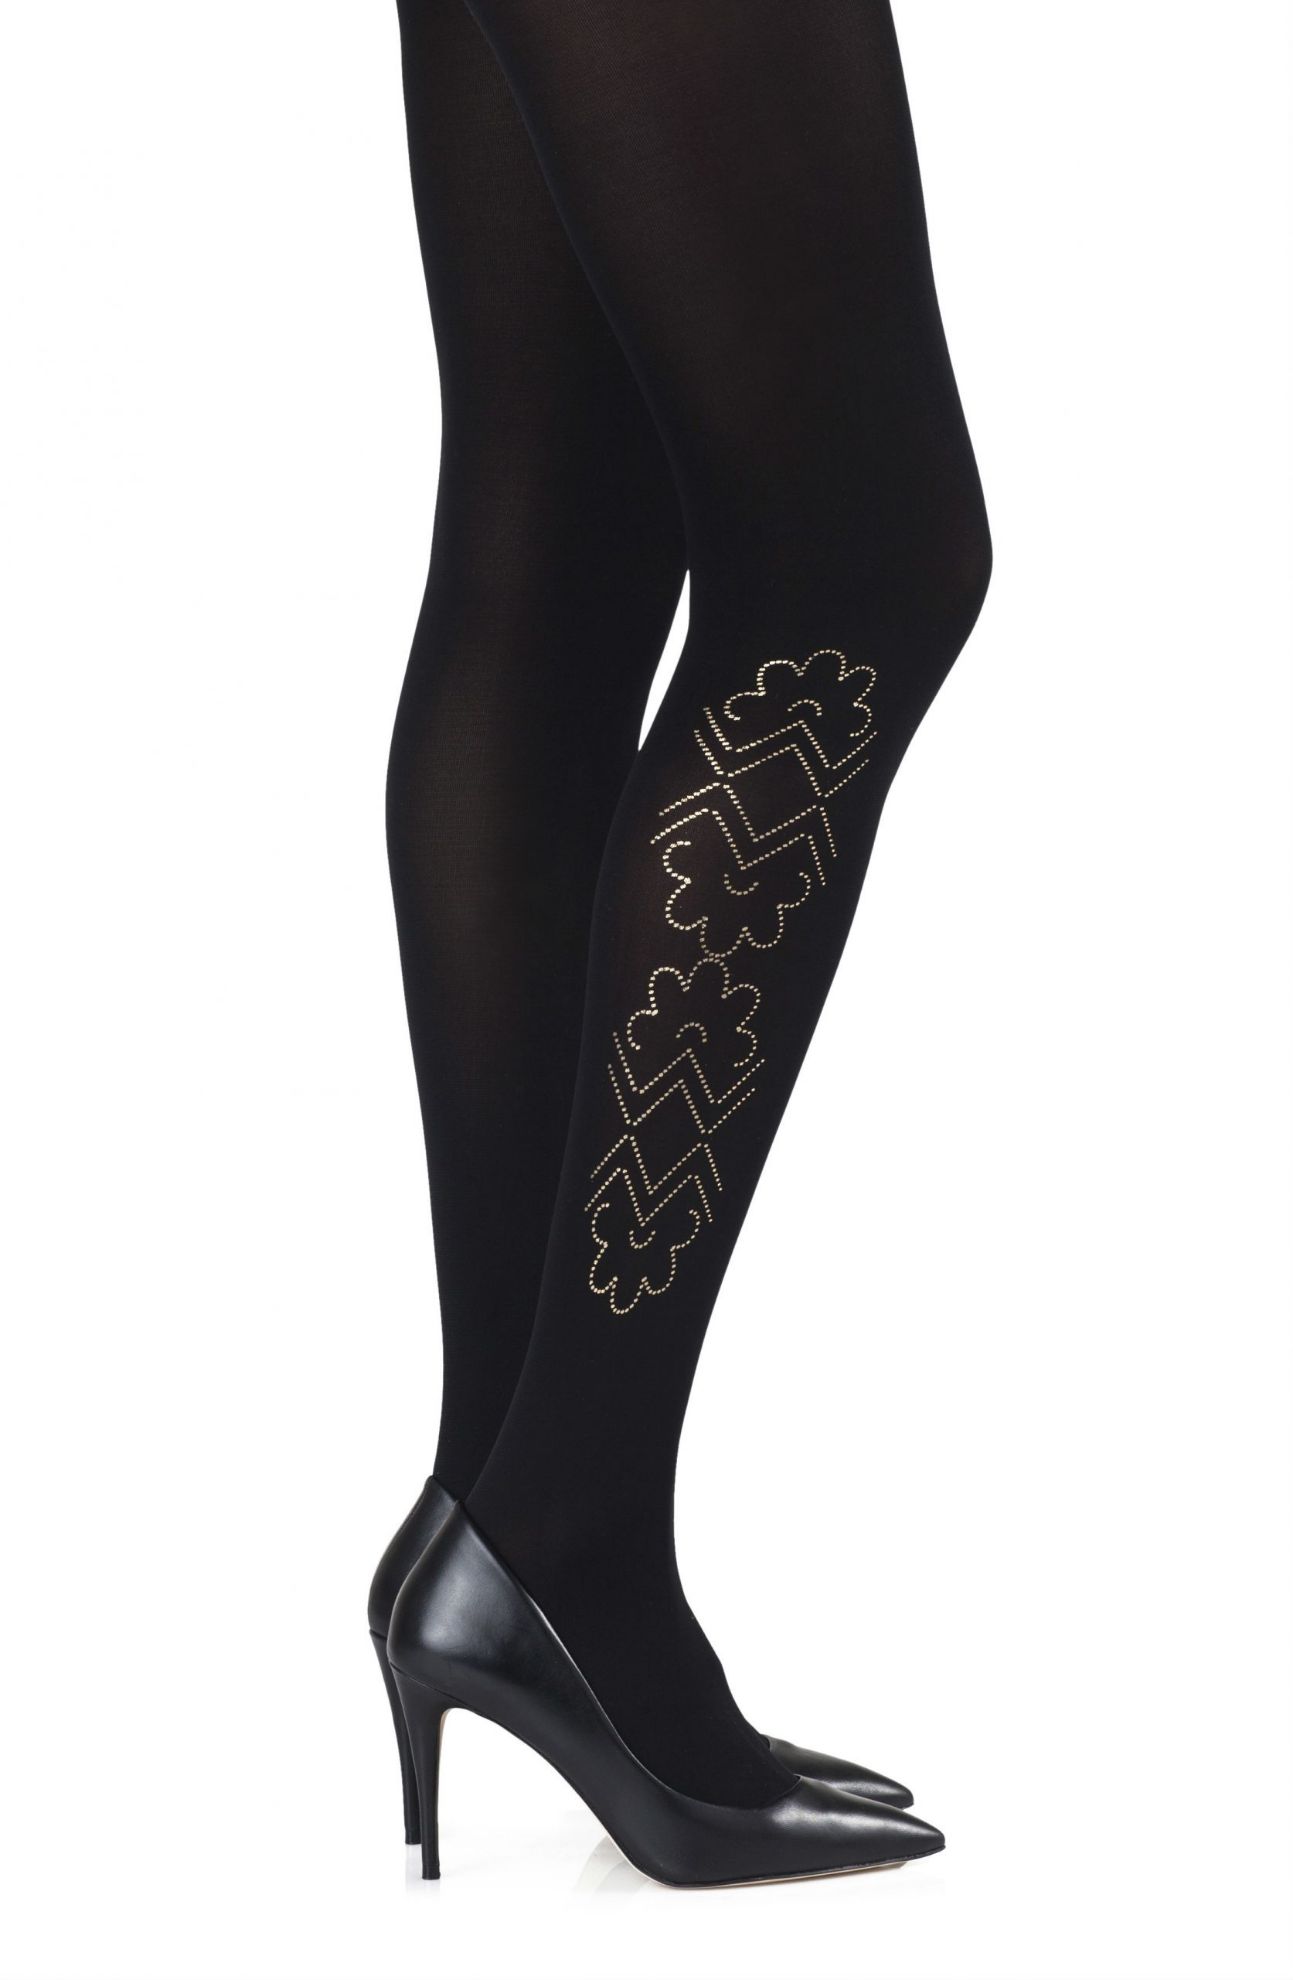 Picture of Zohara "Caught In The Metal" Black Print Tights